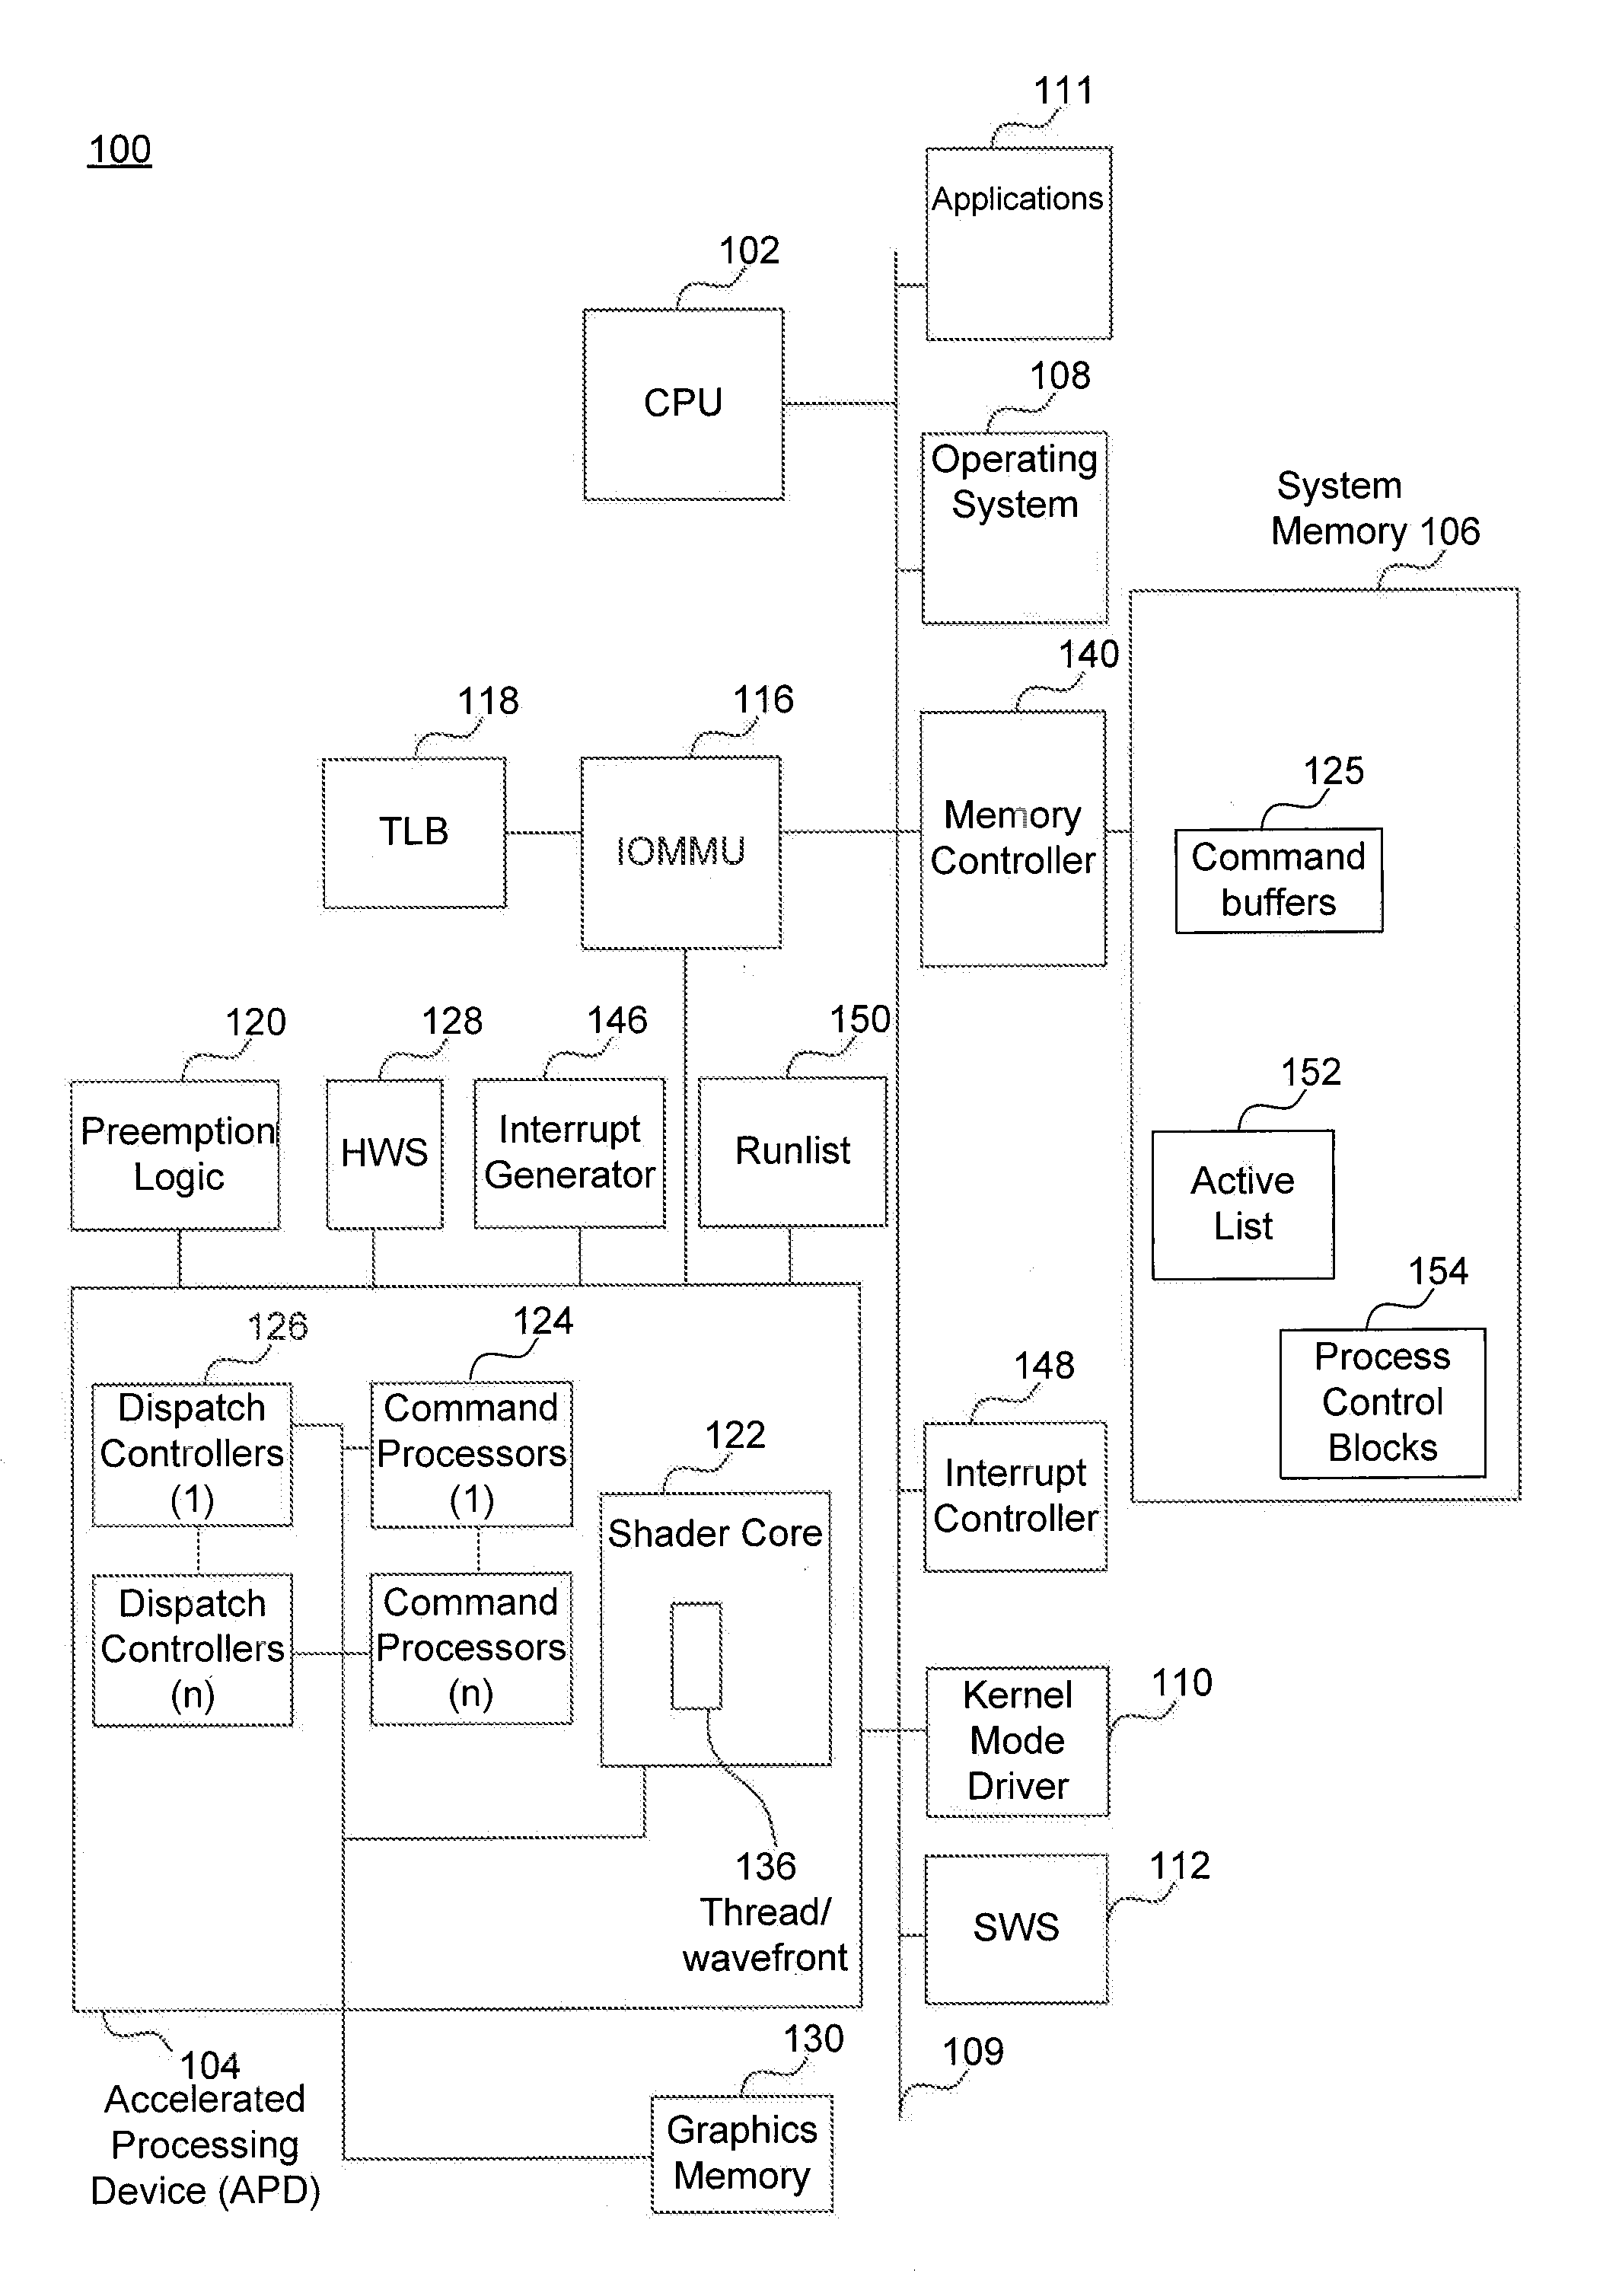 Partitioning Resources of a Processor